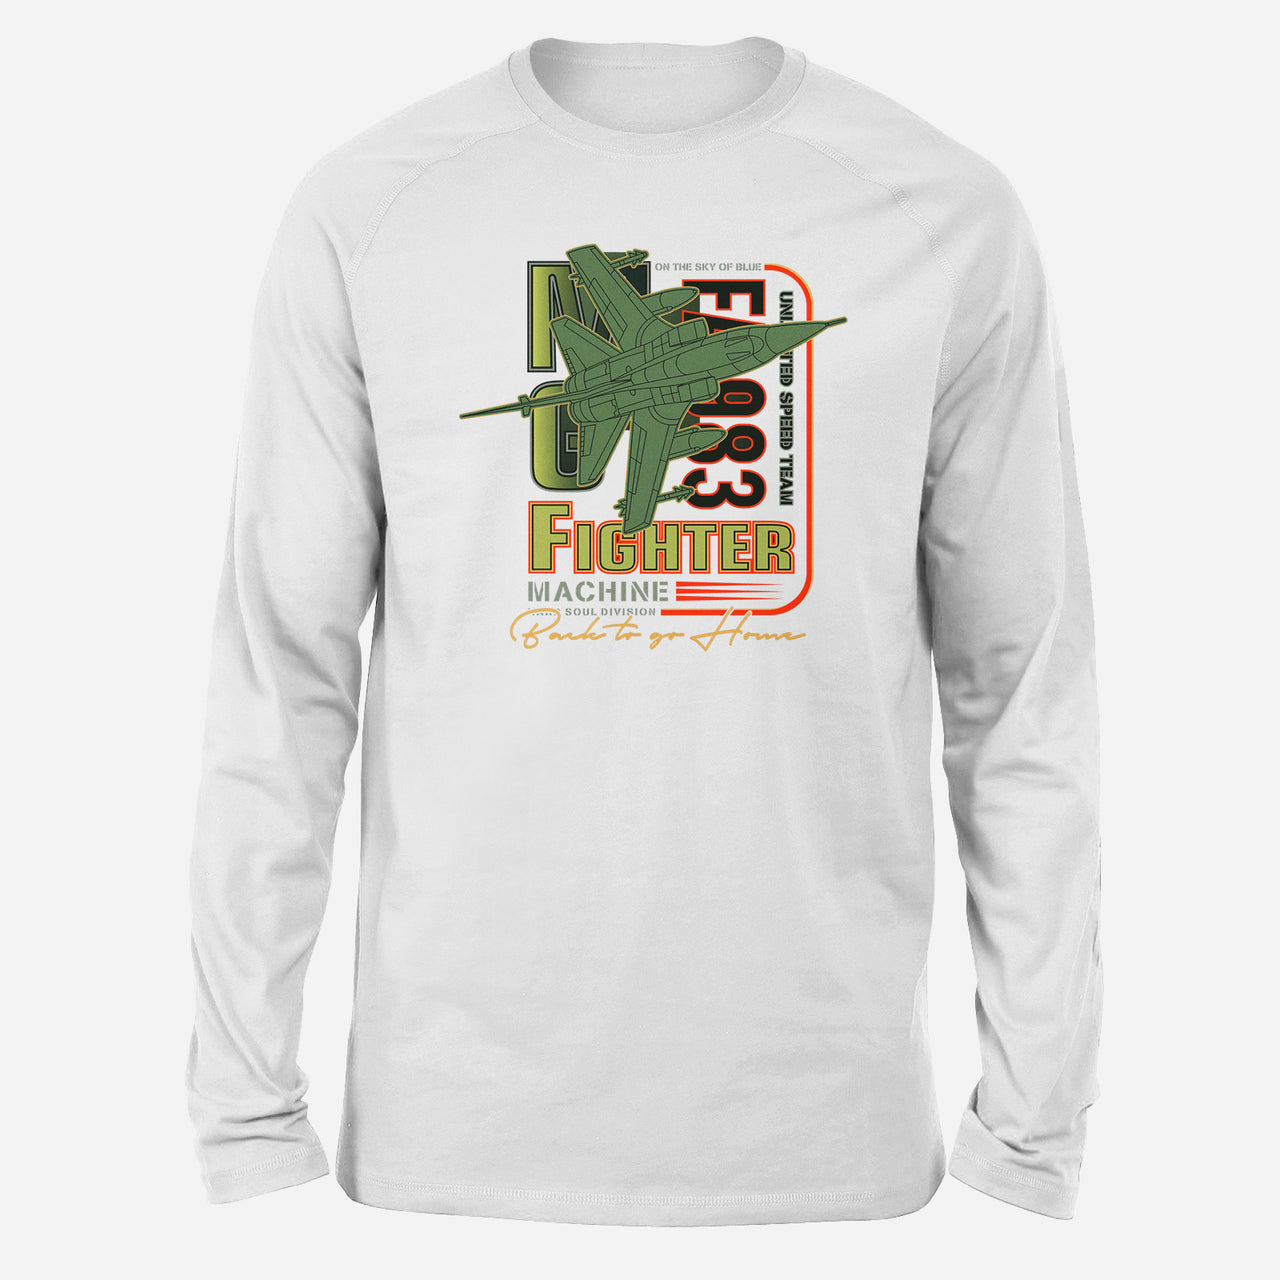 Fighter Machine Designed Long-Sleeve T-Shirts